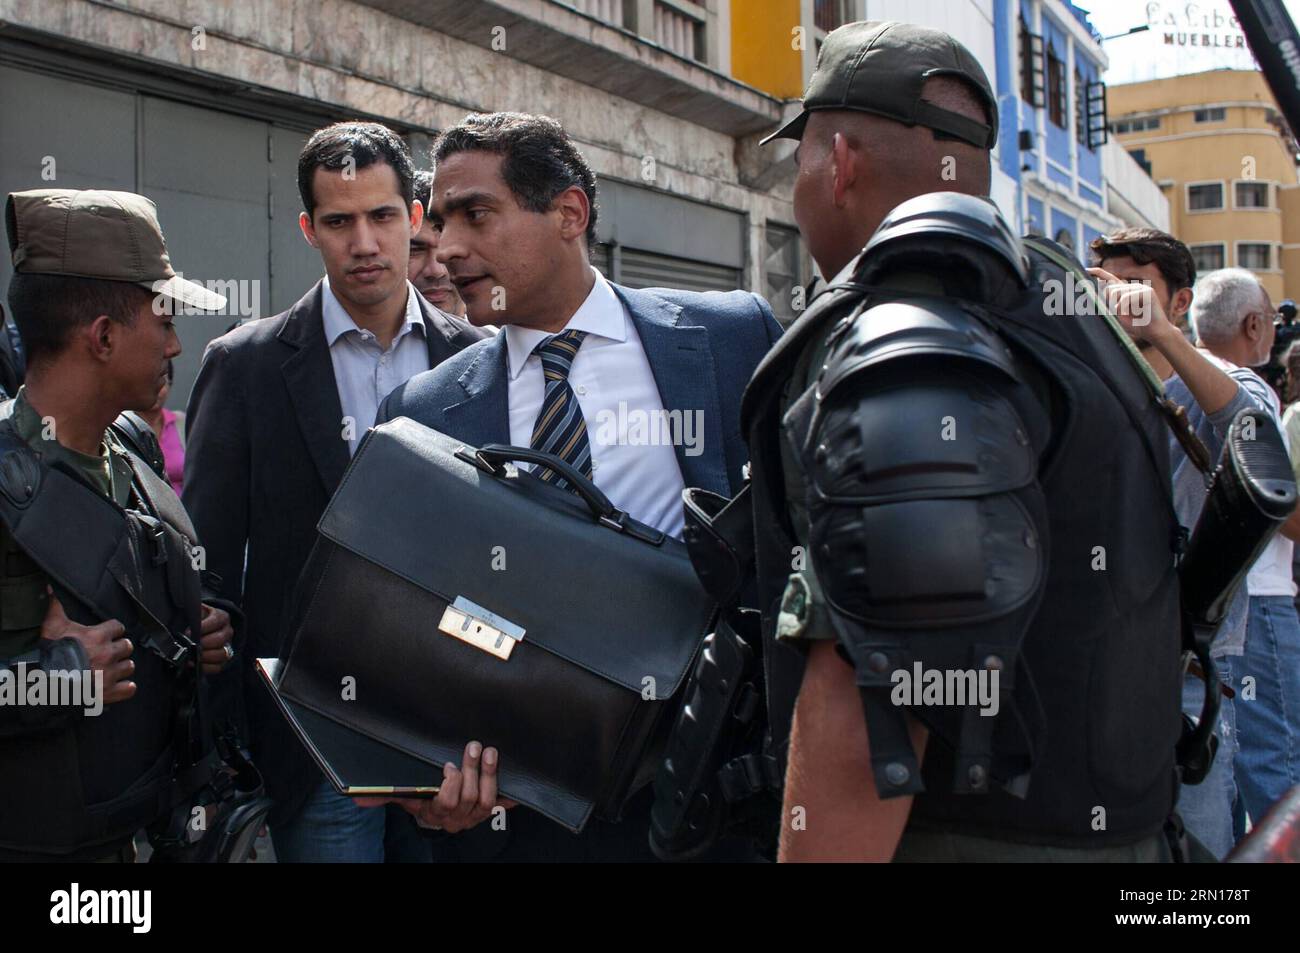 POLITIK Venezuela - Anhörung von inhaftierten Oppositionellen (141202) -- CARACAS, Dec. 2, 2014 -- Juan Carlos Gutierrez (C), attorney of the opposition leader Leopoldo Lopez, arrives at the Palace of Justice in Caracas, Venezuela, on Dec. 2, 2014. The UN High Commissioner for Human Rights Zeid Ra ad Al Hussein called on late October for the immediate release of Venezuelan right-wing politicians Leopoldo Lopez and Daniel Ceballos, and others arrested following violent anti-government protests that left 40 dead. Boris Vergara) (rtg) VENEZUELA-CARACAS-JUSTICE-LOPEZ e BorisxVergara PUBLICATIONxNO Stock Photo